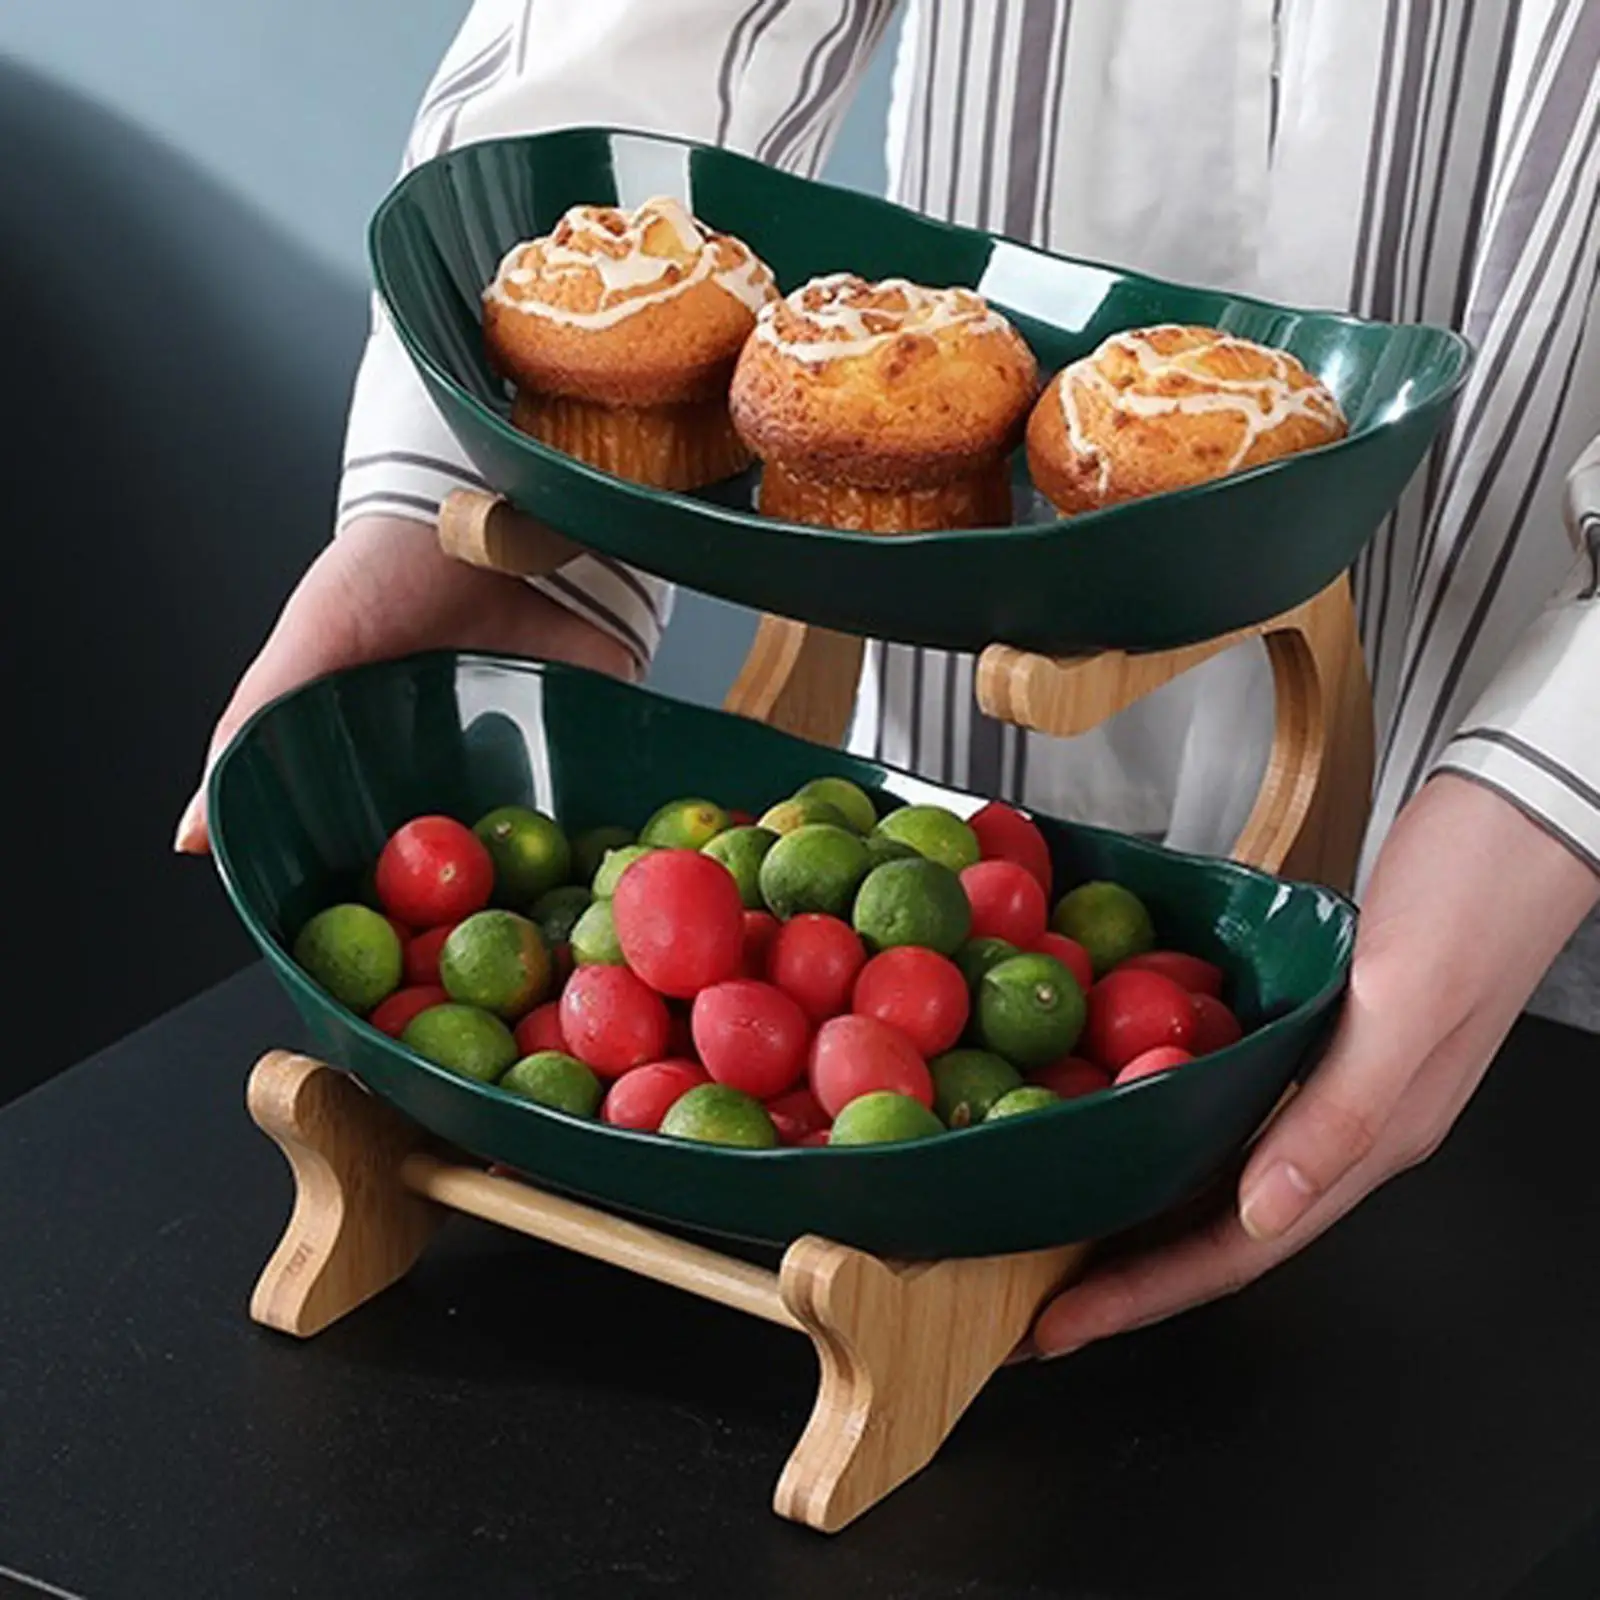 Tiered Fruit Plate Oval Bowl with Wood Holder Rack, Display for Candy, Fruit and